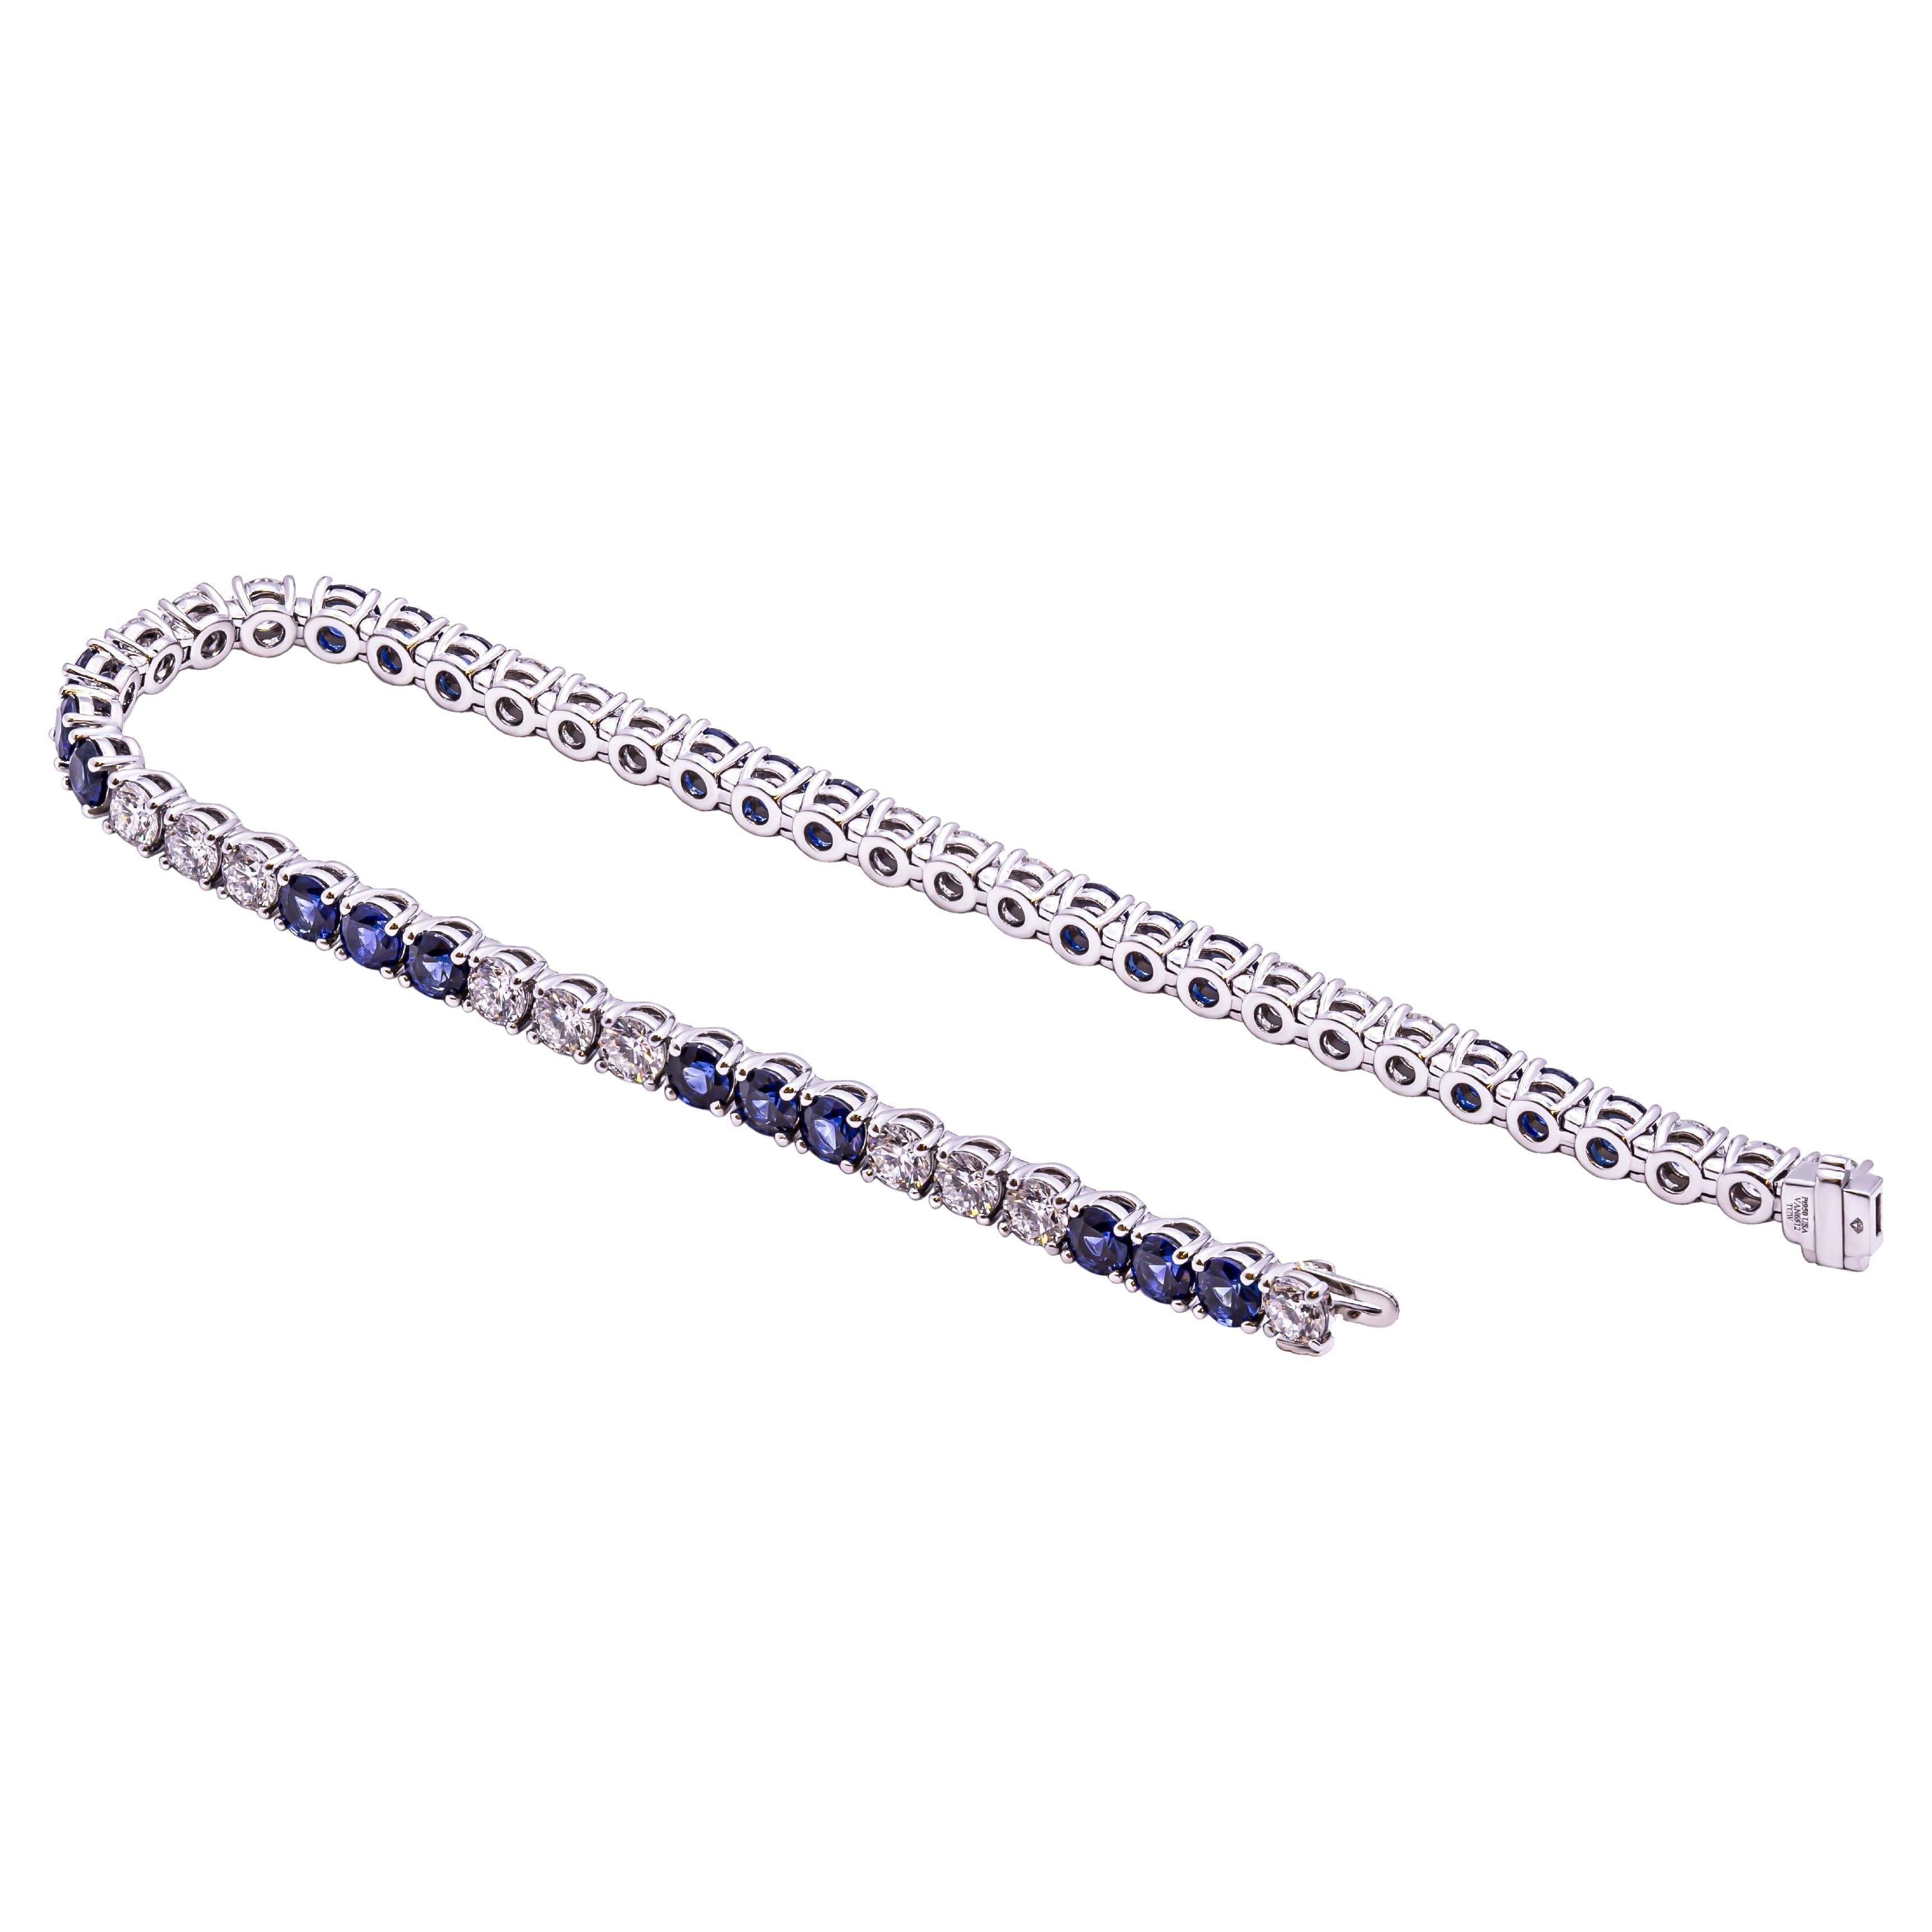 Introducing our Platinum Tennis Bracelet, a dazzling fusion of sophistication and style. Elevate your look with this exquisite piece, featuring a meticulous alternation of 49 round stones, each boasting 0.14 carats of pure brilliance. Crafted in